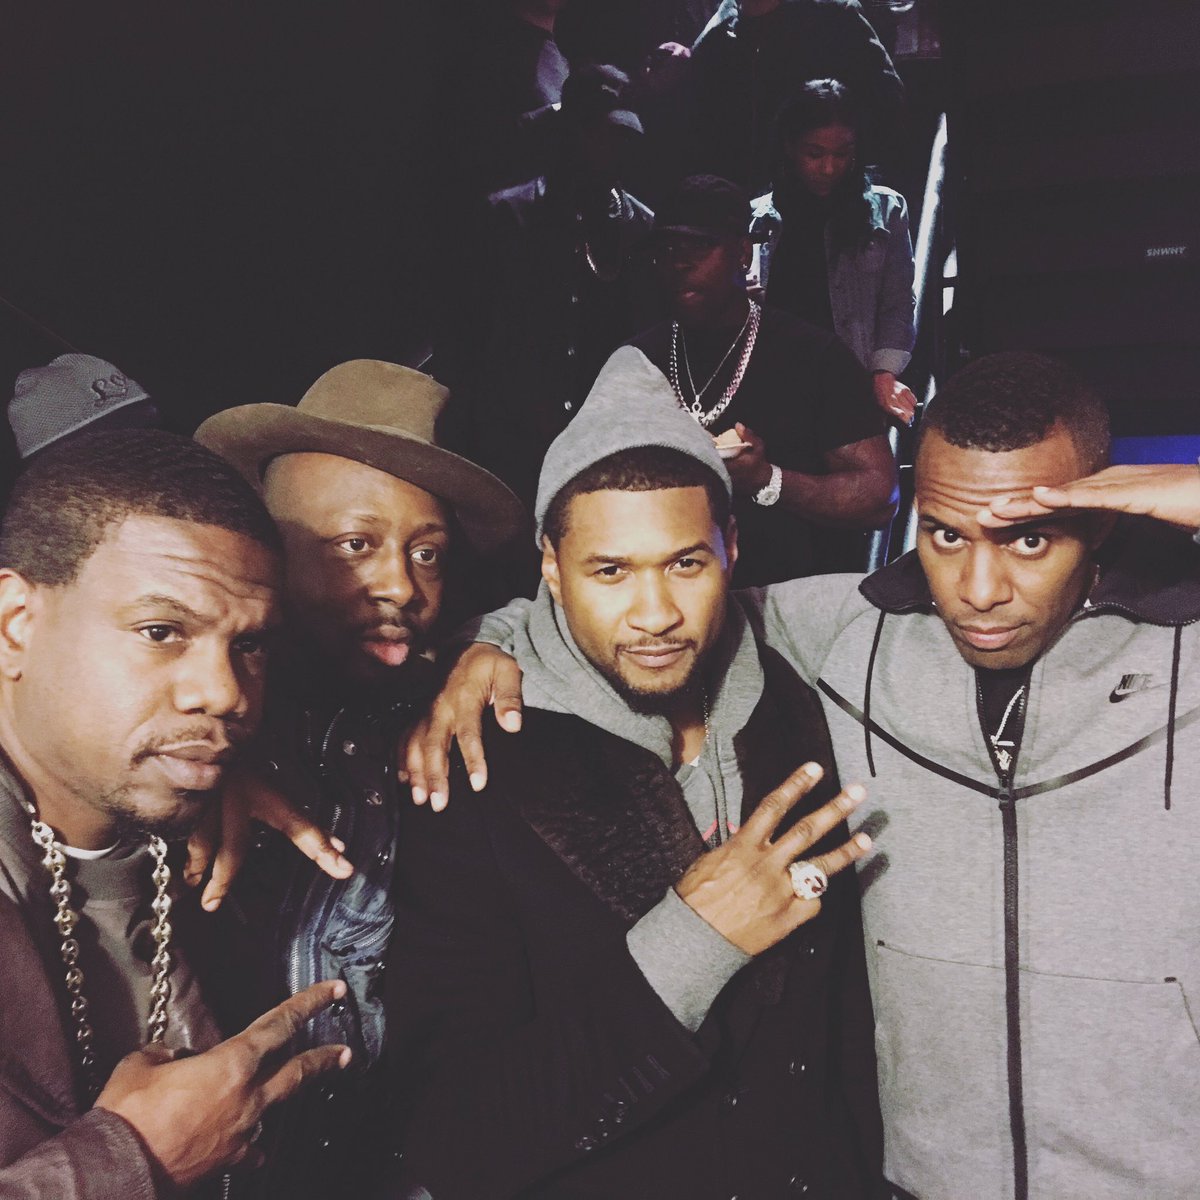 RT @DJWhooKid: Rolled in with the crew. #NYC @Usher @wyclef --- ???????????????????????????????? @youngthug concert https://t.co/yIXYV5ZPQF